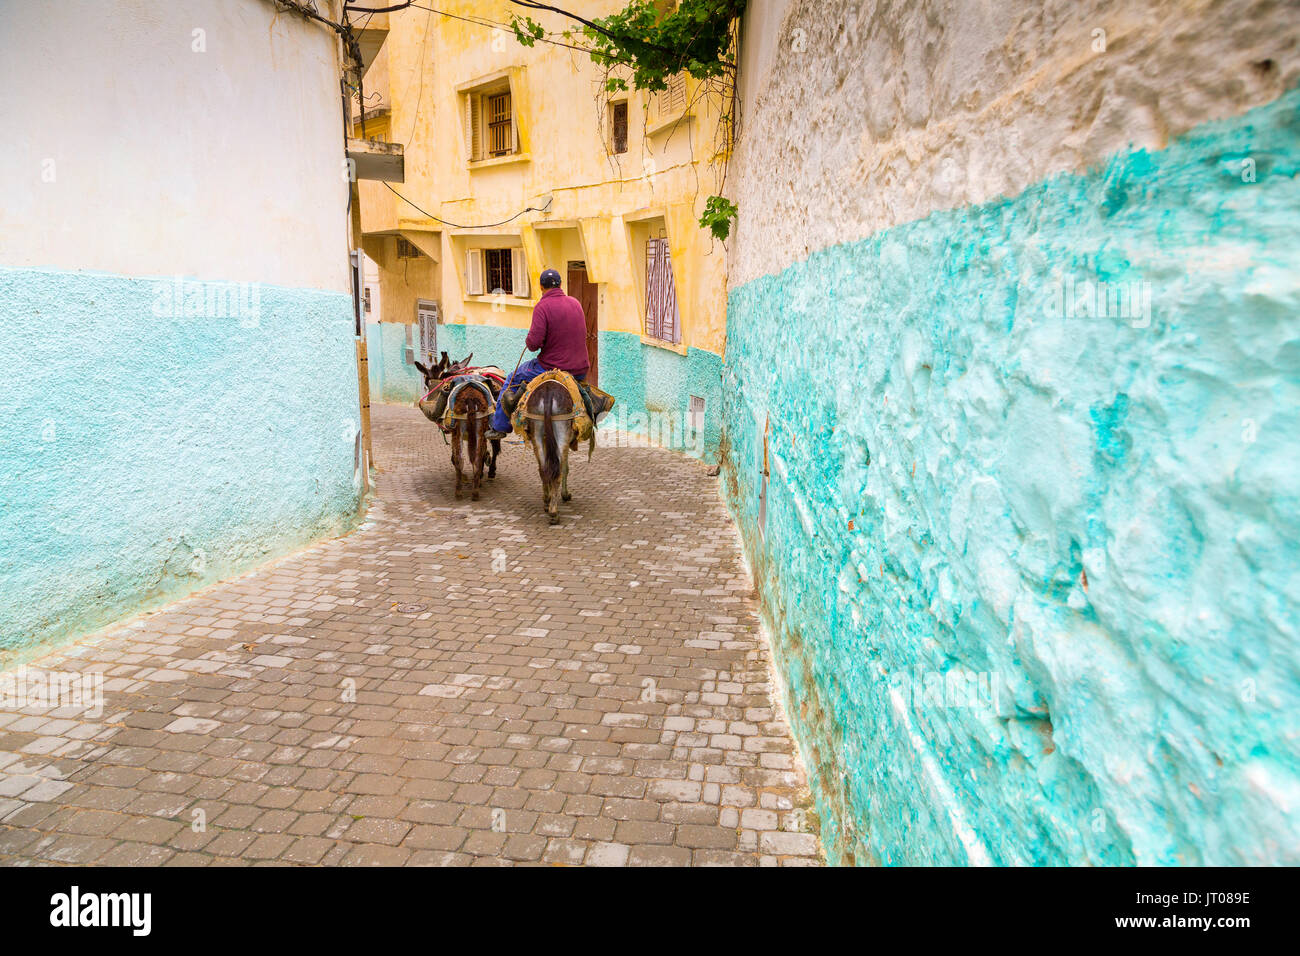 Man riding a donkey, Street life scene, Moulay Idriss. Morocco, Maghreb North Africa Stock Photo